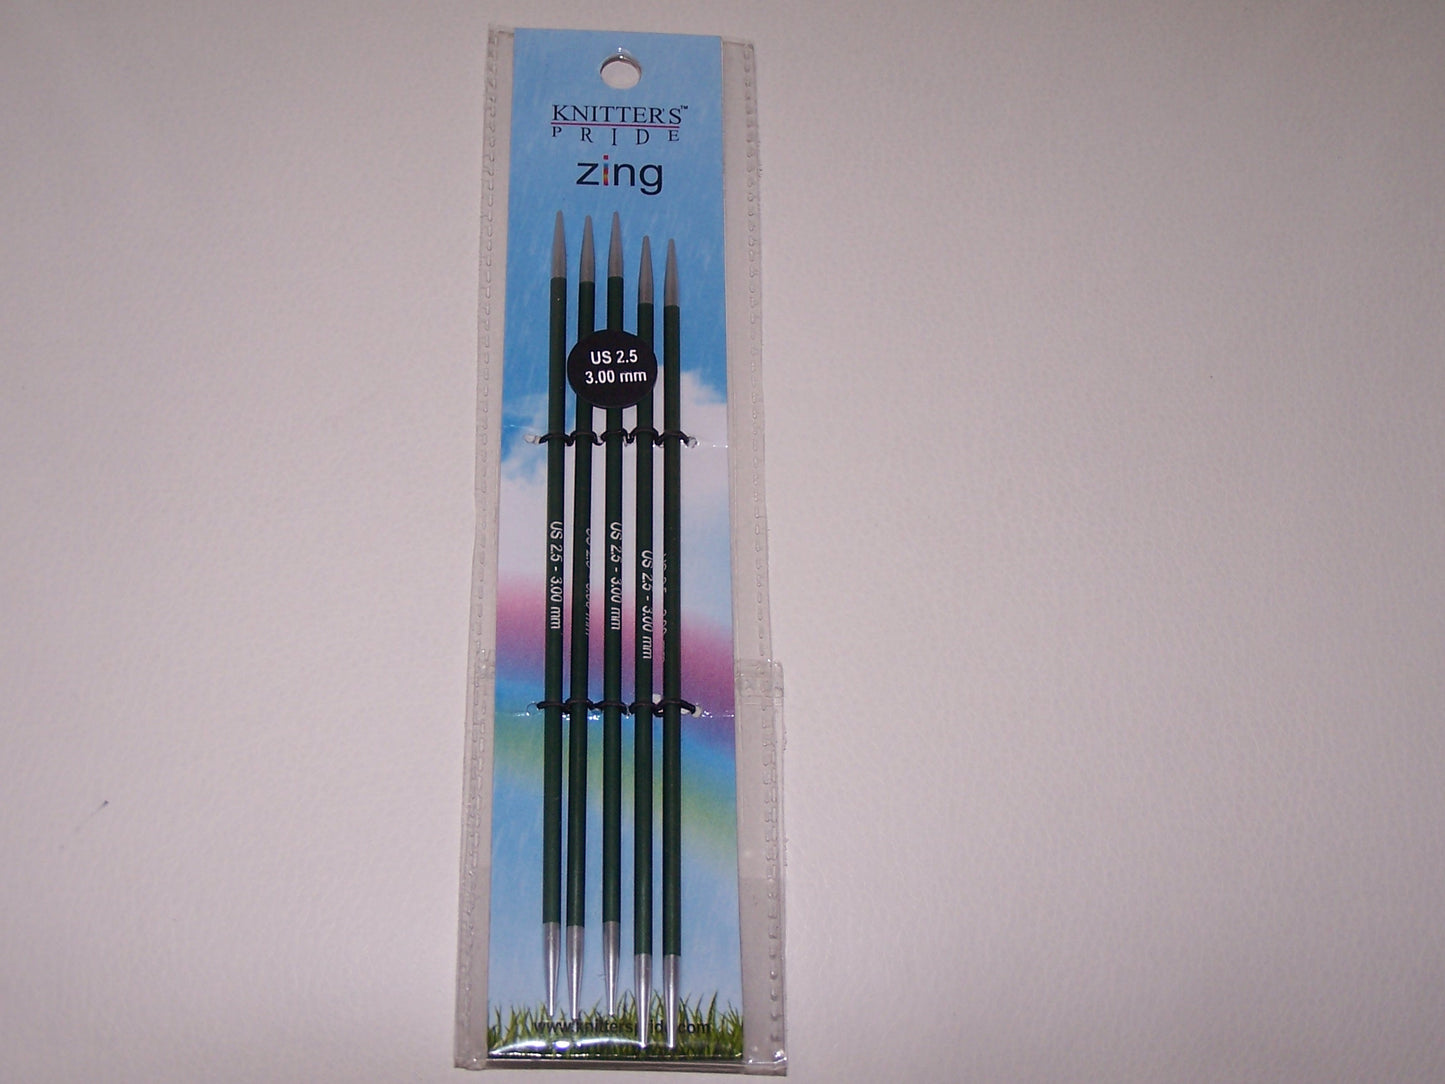 Knitters Pride Zing US 2.5 (3.00mm) size 6 inch DPN's